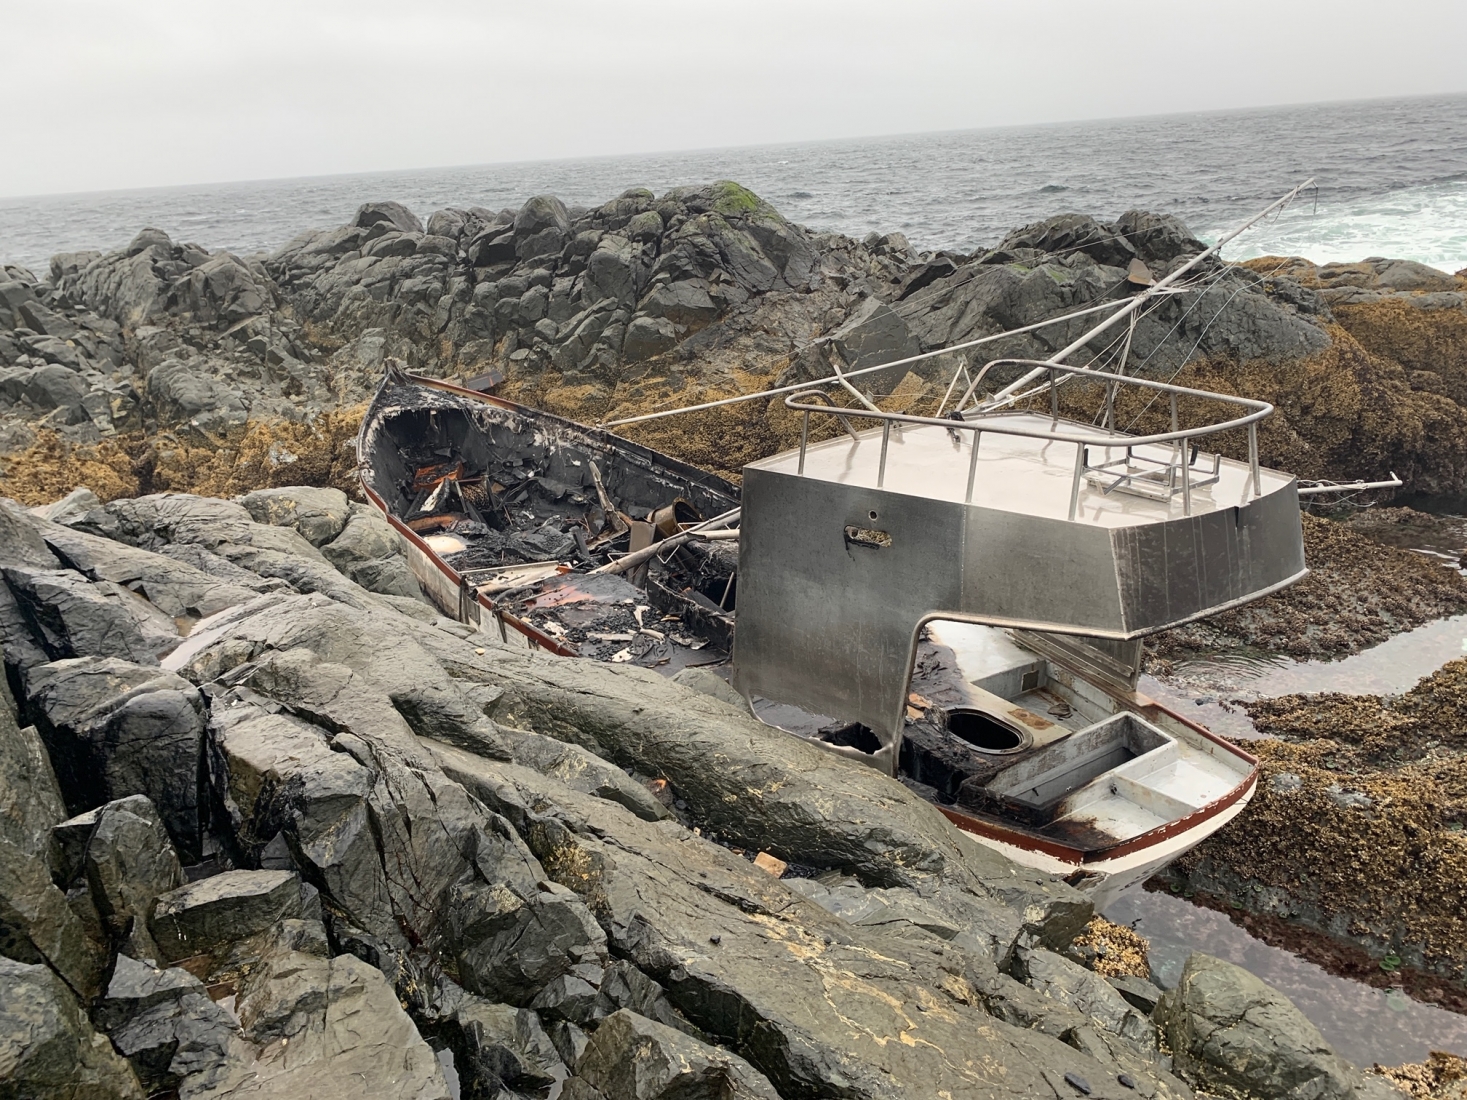 A vessel with visible fire damage grounded on a rocky shore. 